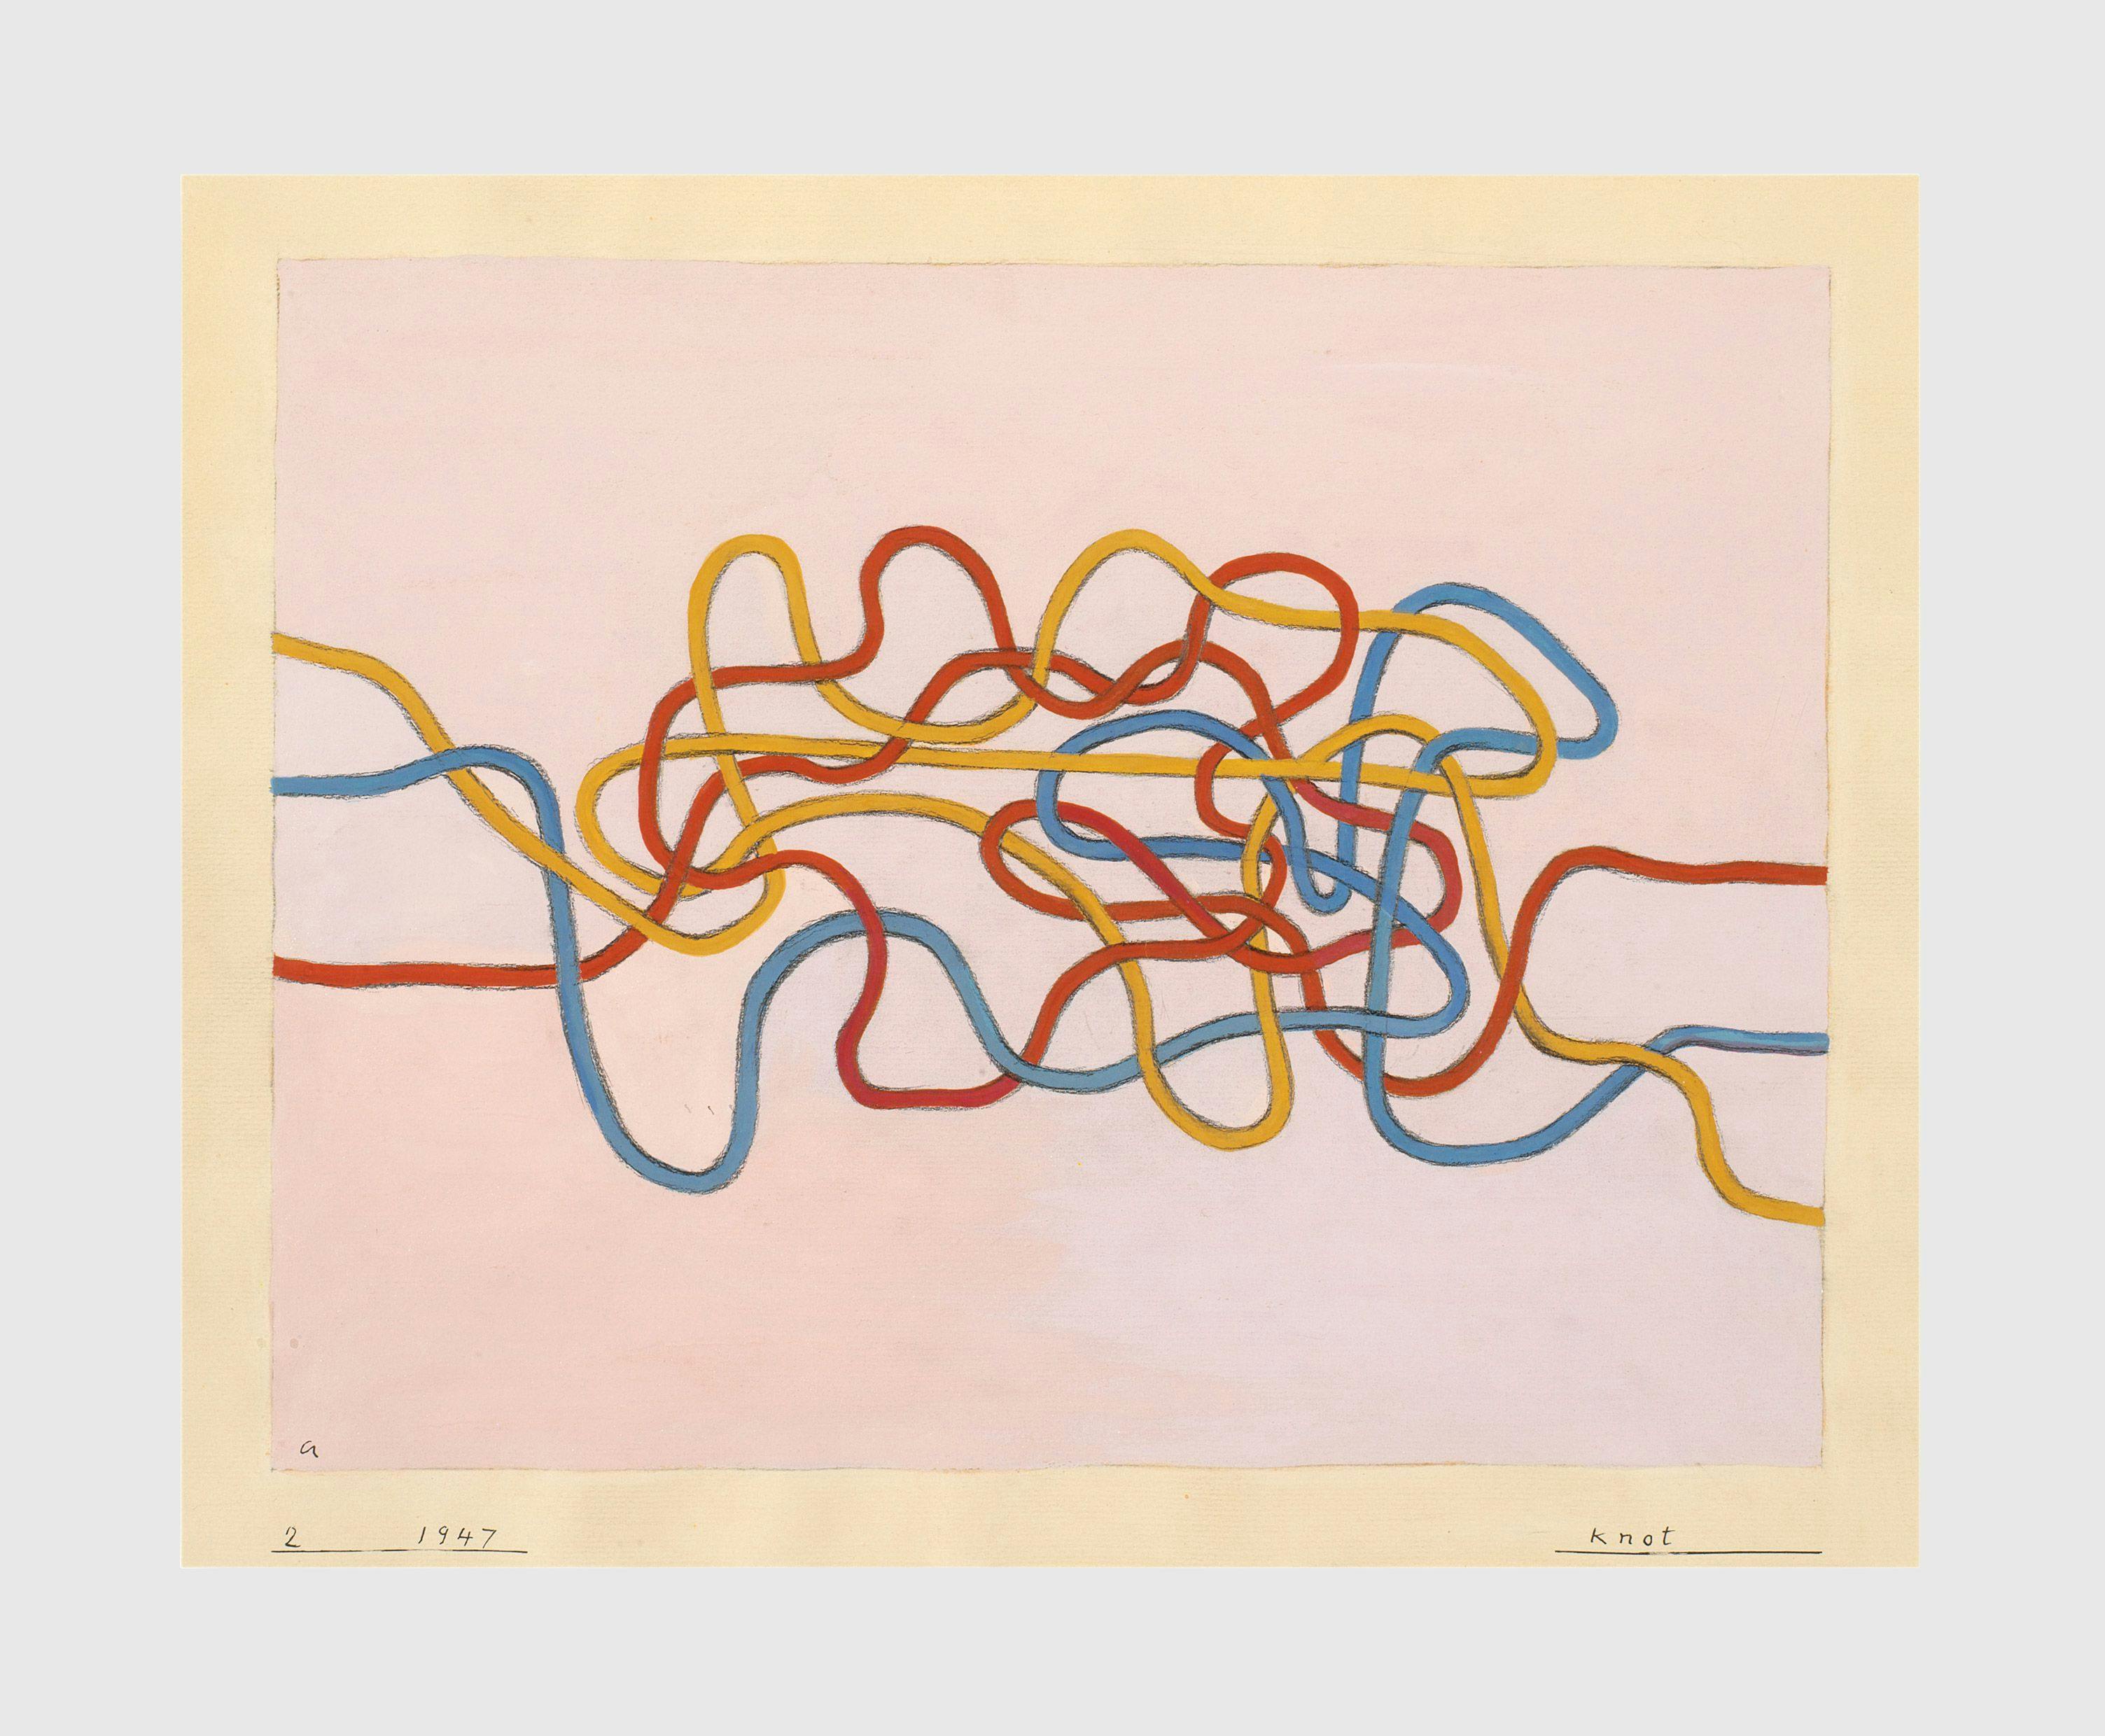 A drawing by Anni Albers, titled Knot, dated 1947.